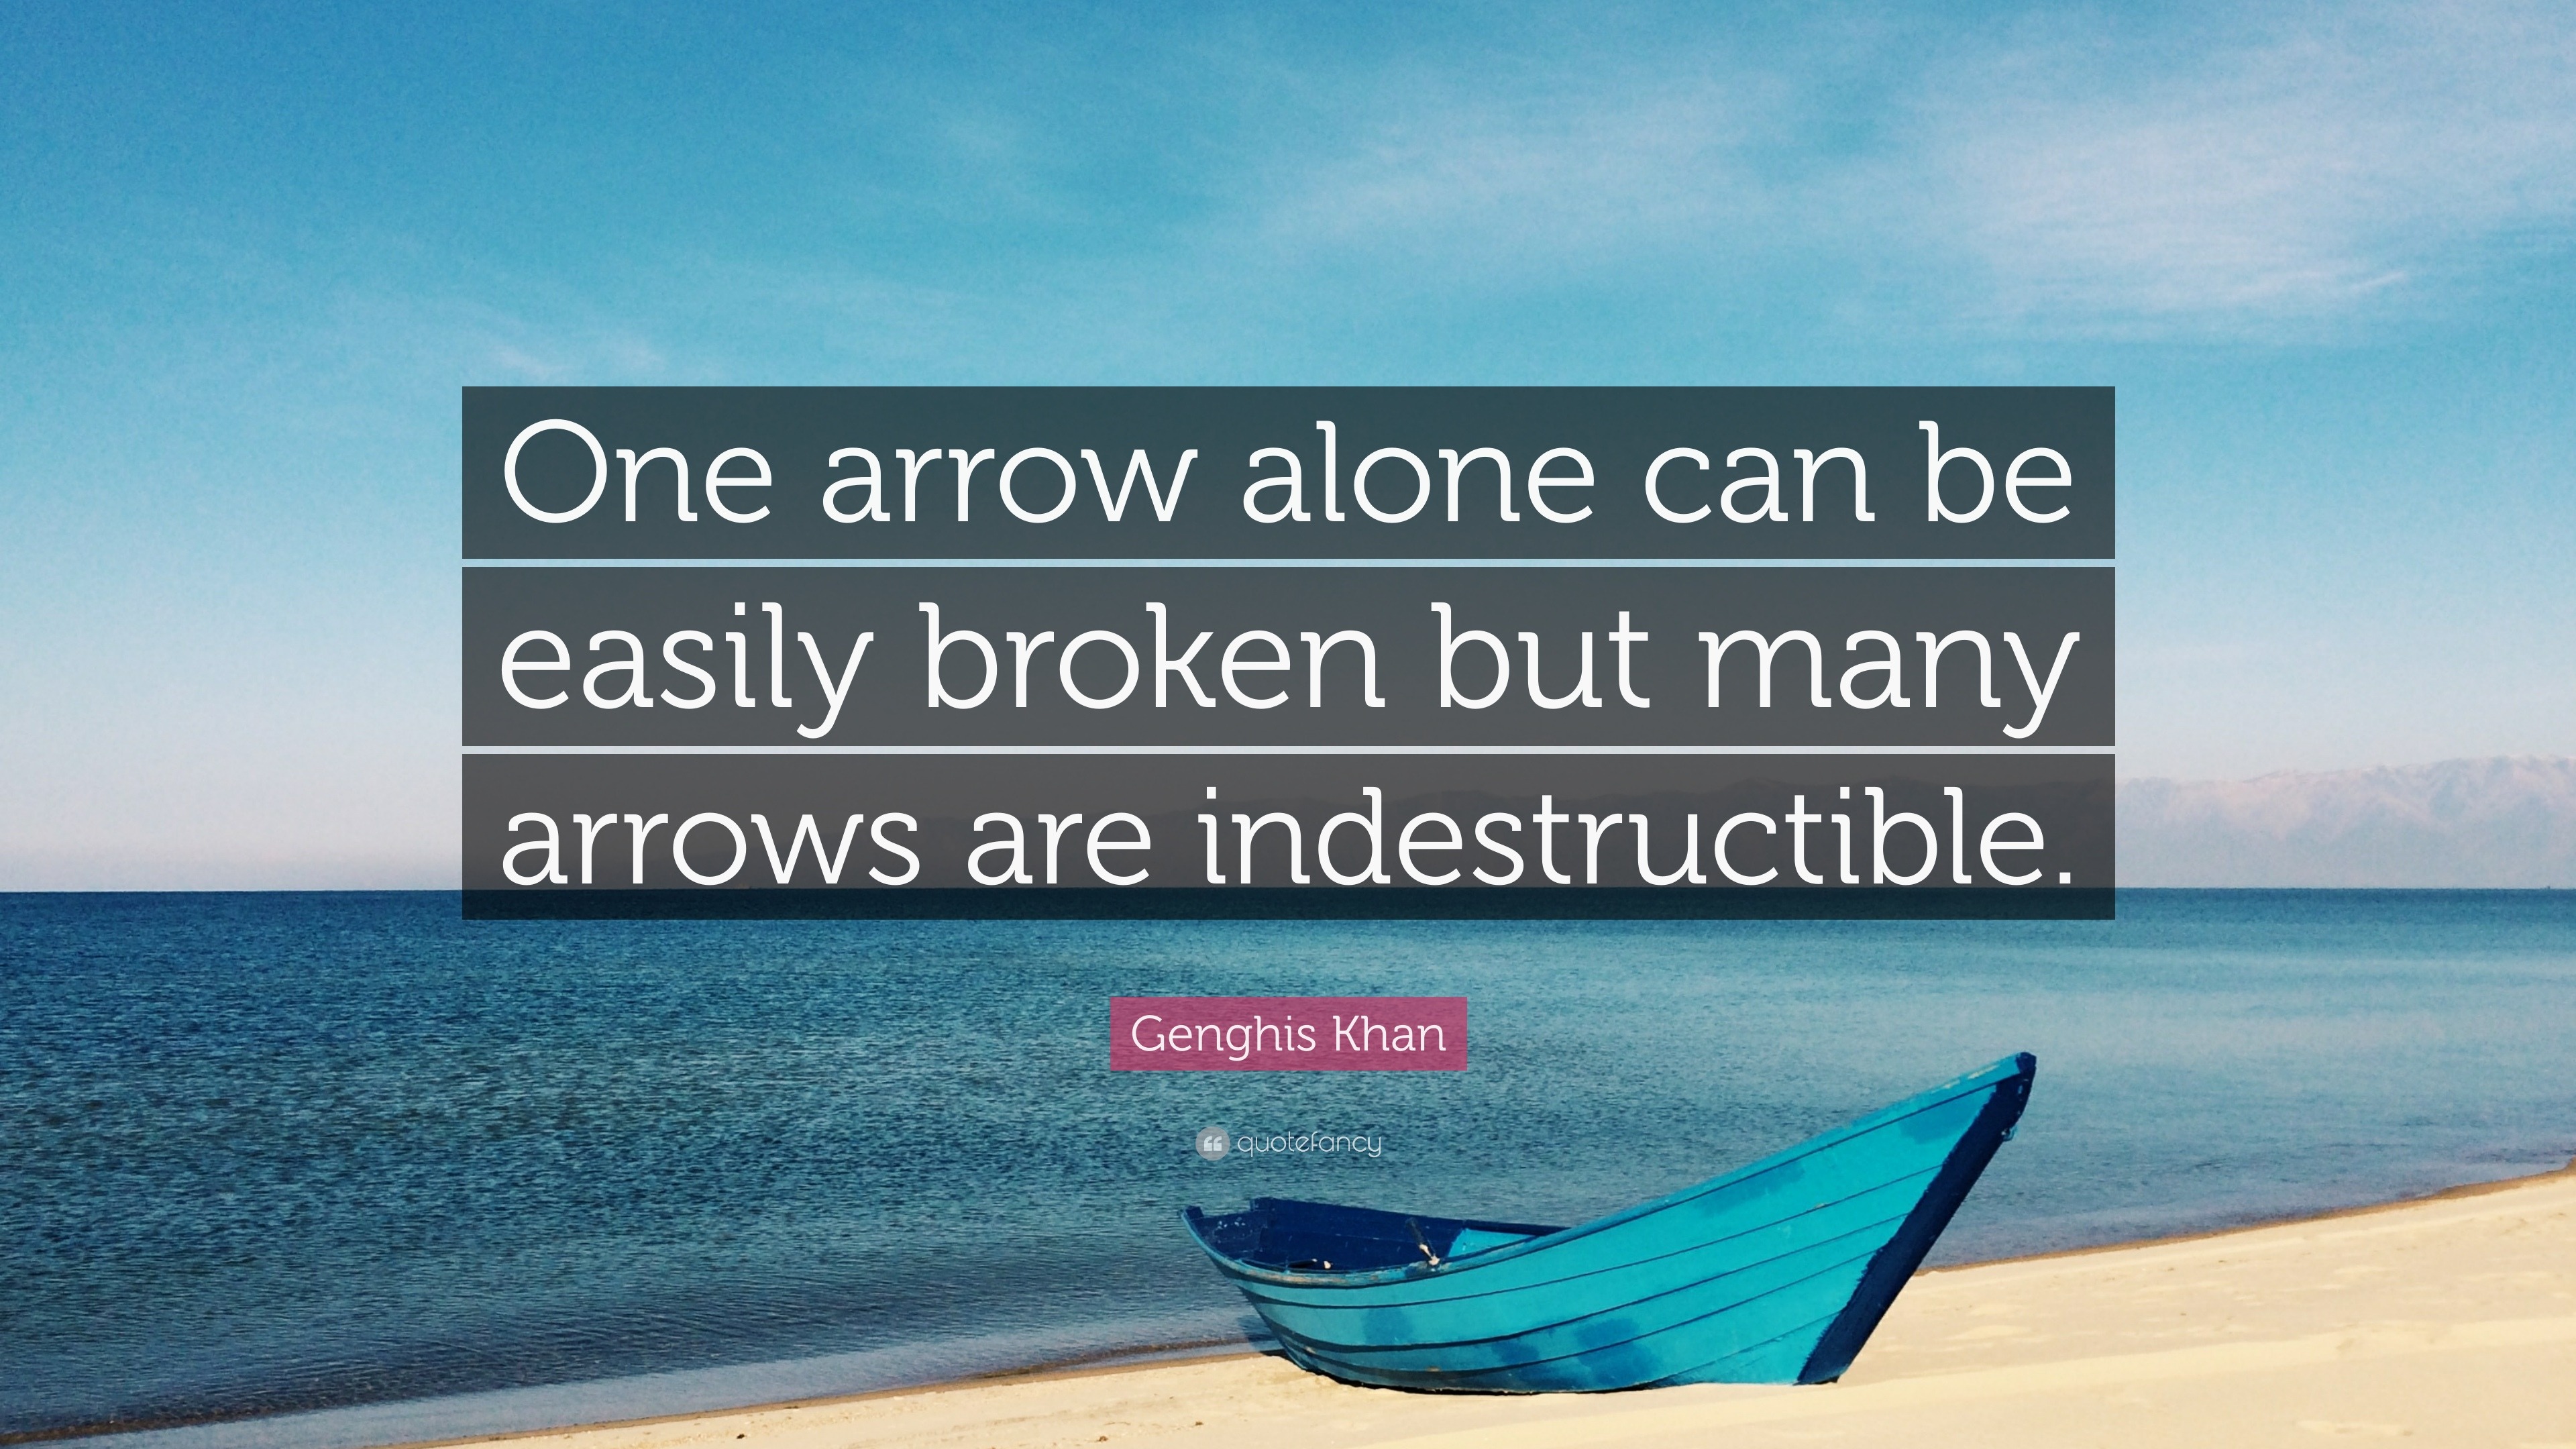 Genghis Khan Quote: “One arrow alone can be easily broken but many ...